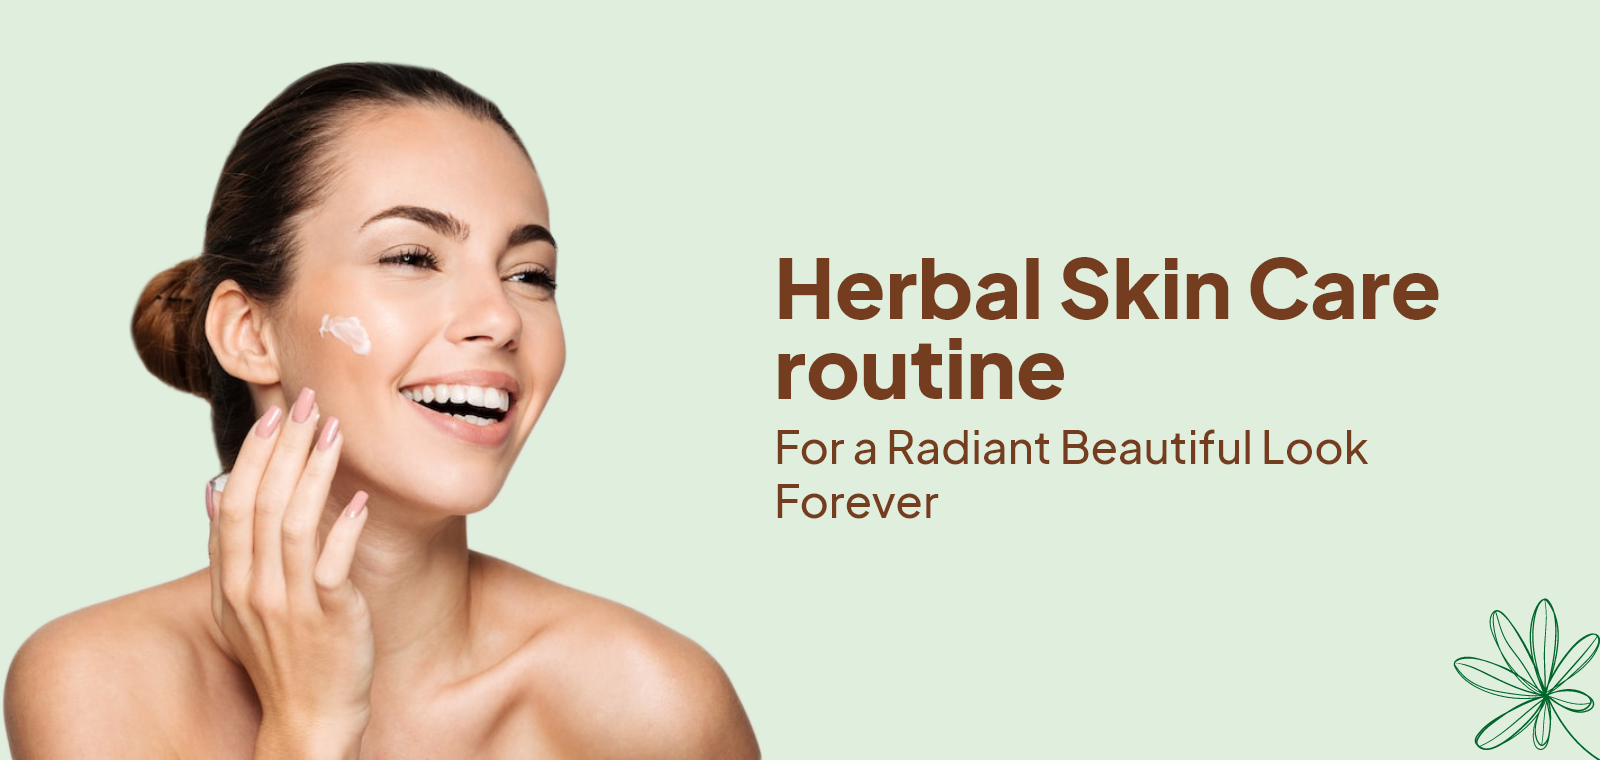 Herbal Skin Care For a Radiant Beautiful Look Forever